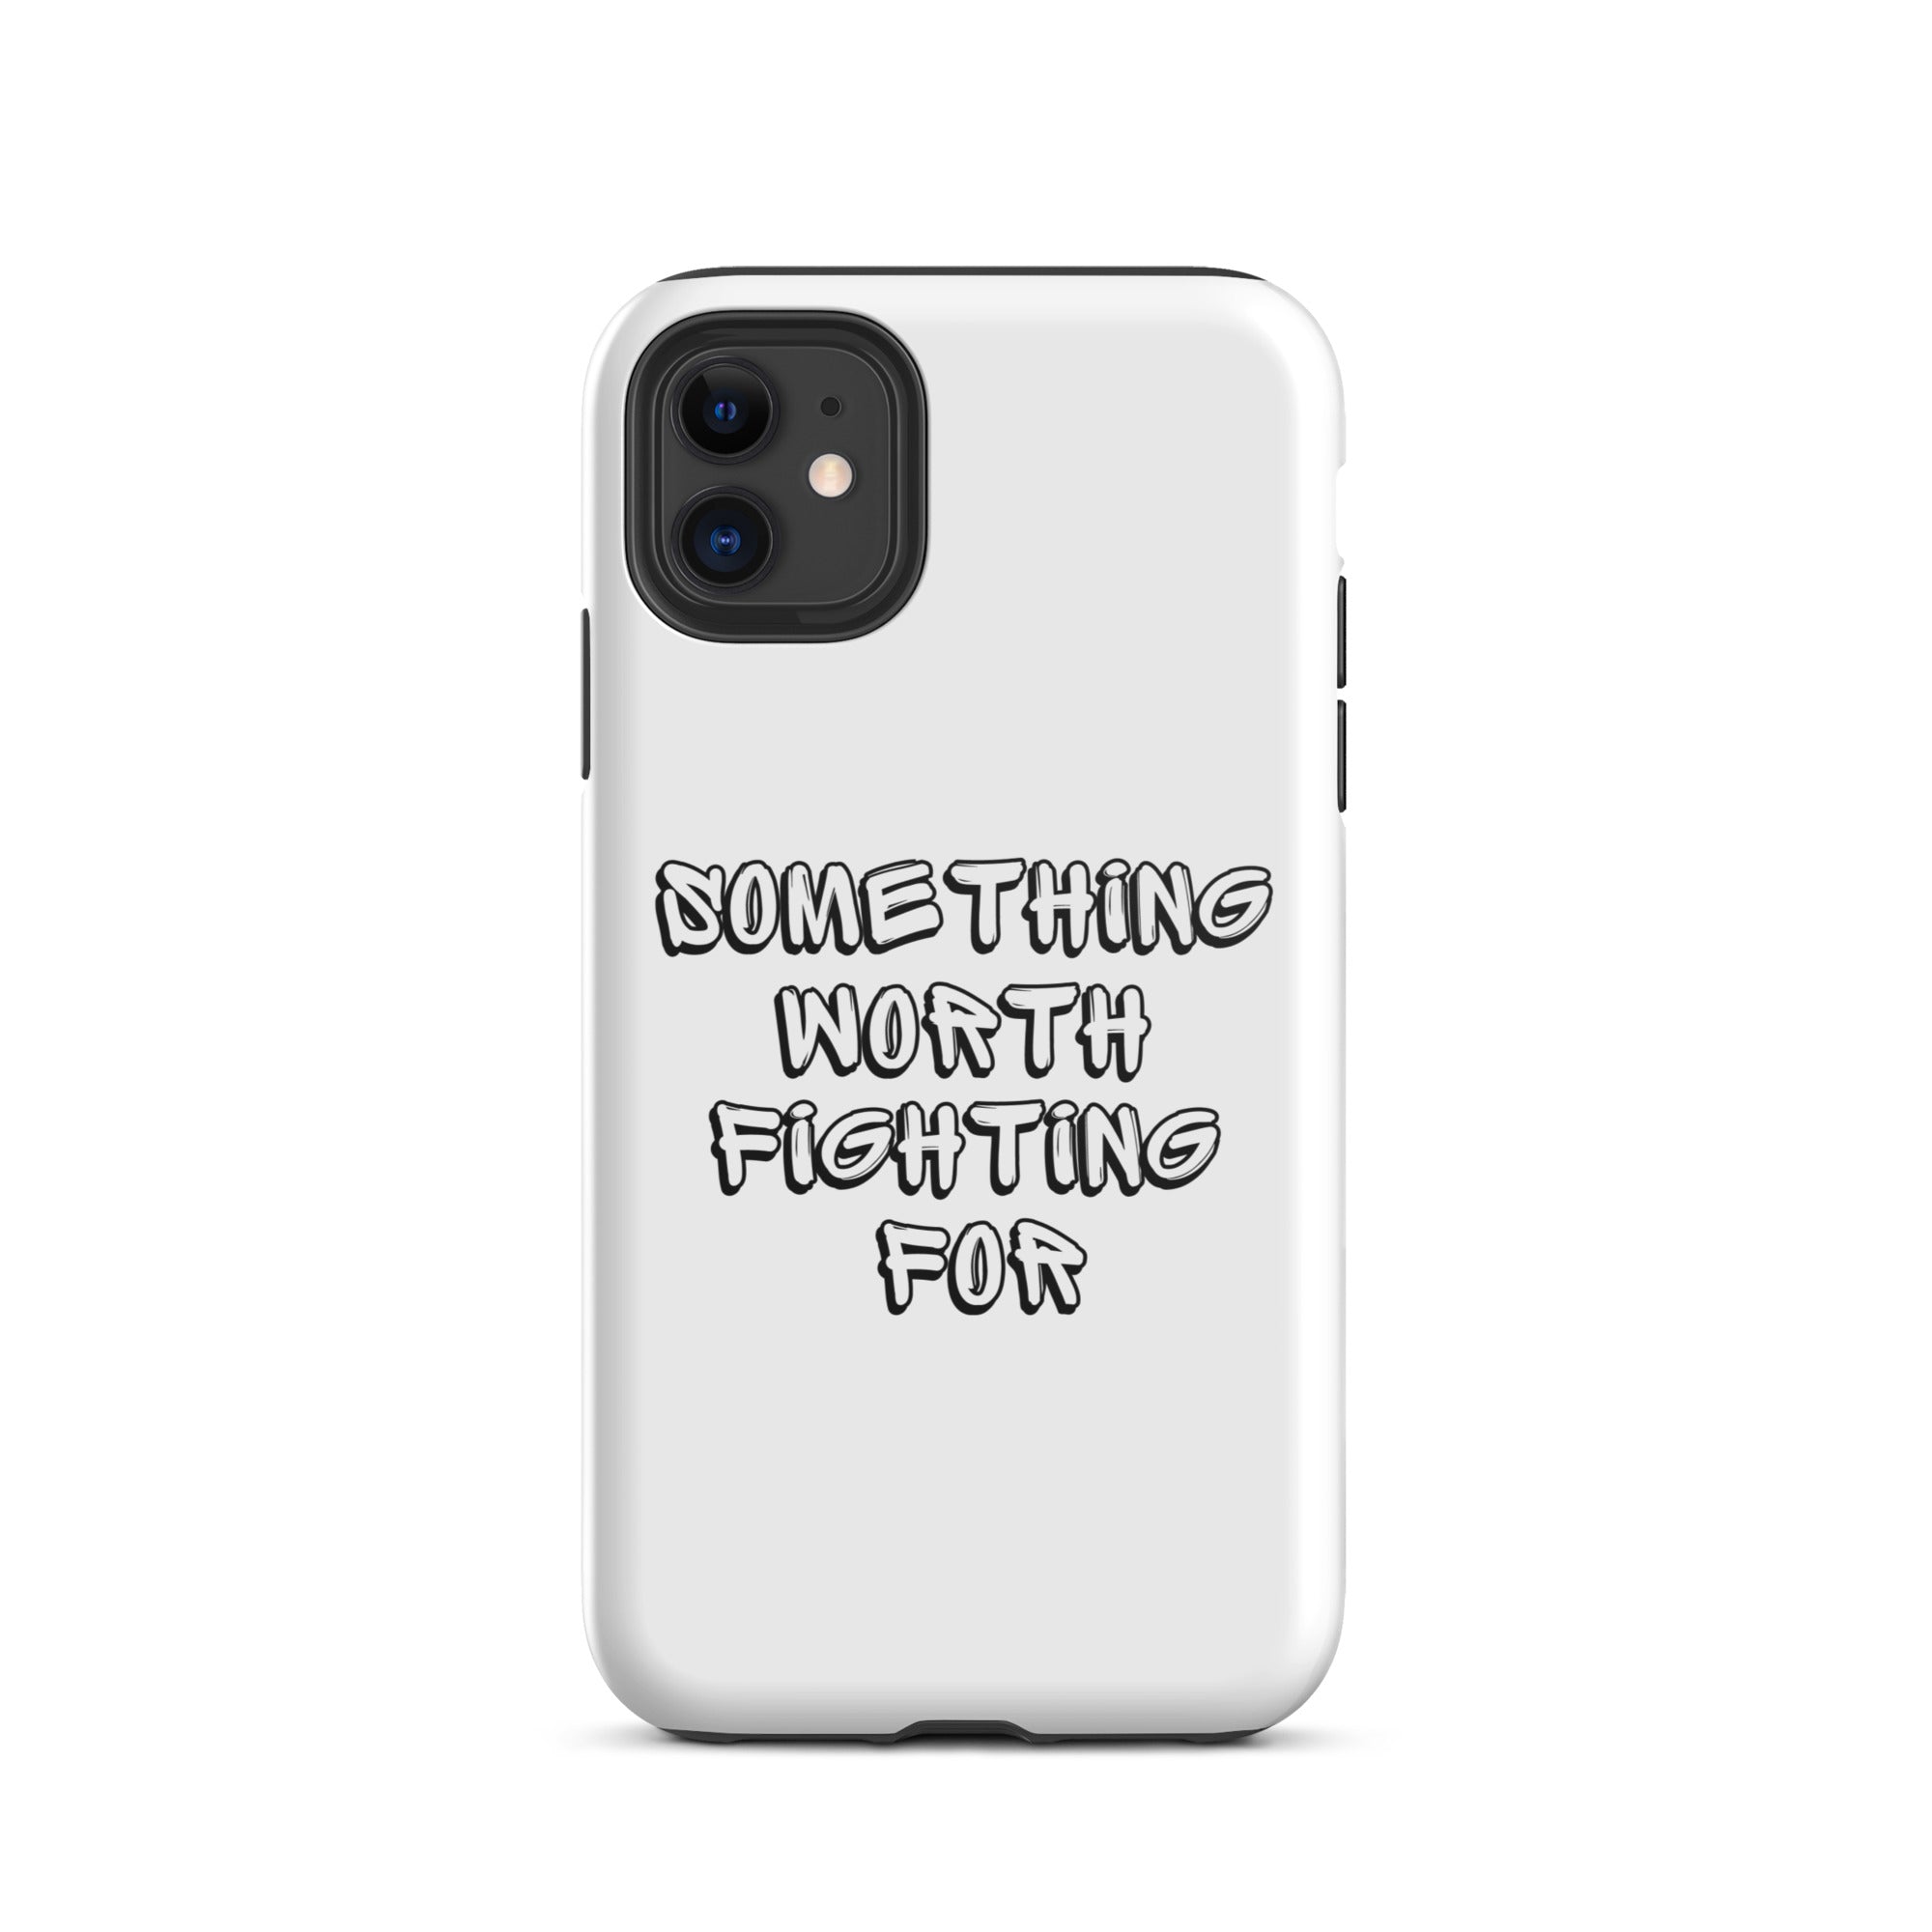 Something Worth Fighting For - Tough iPhone case